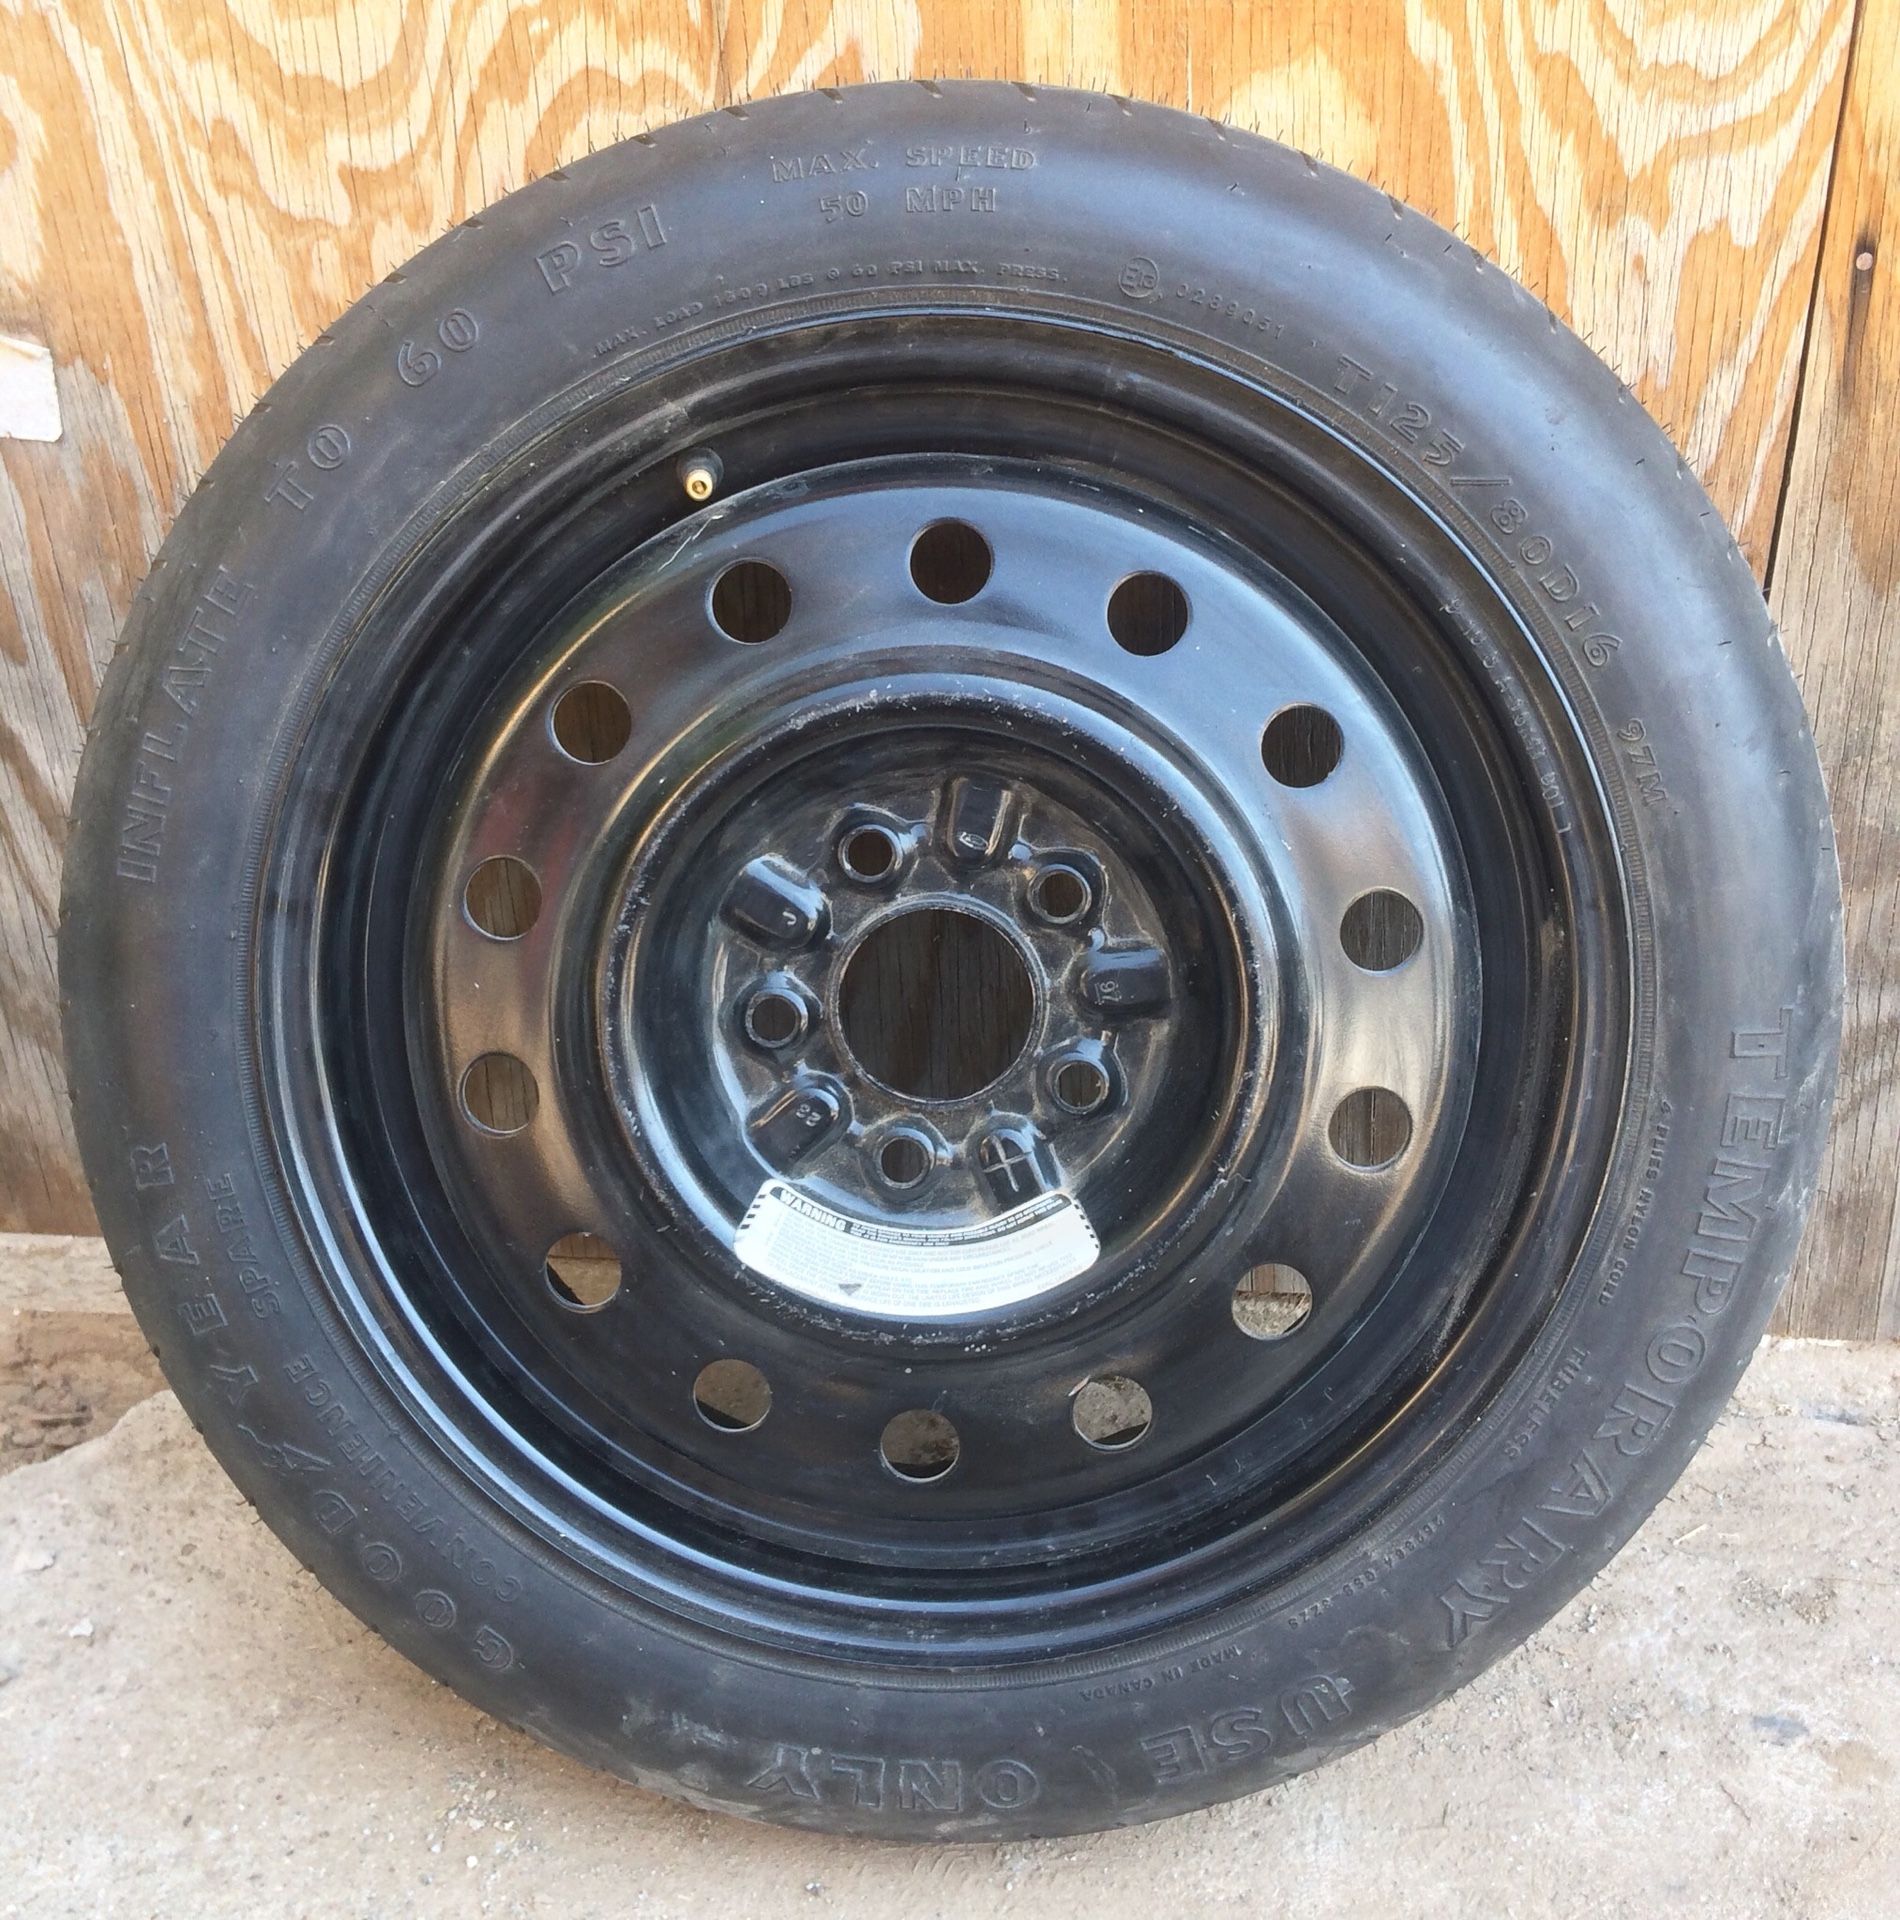 Spare tire with rim